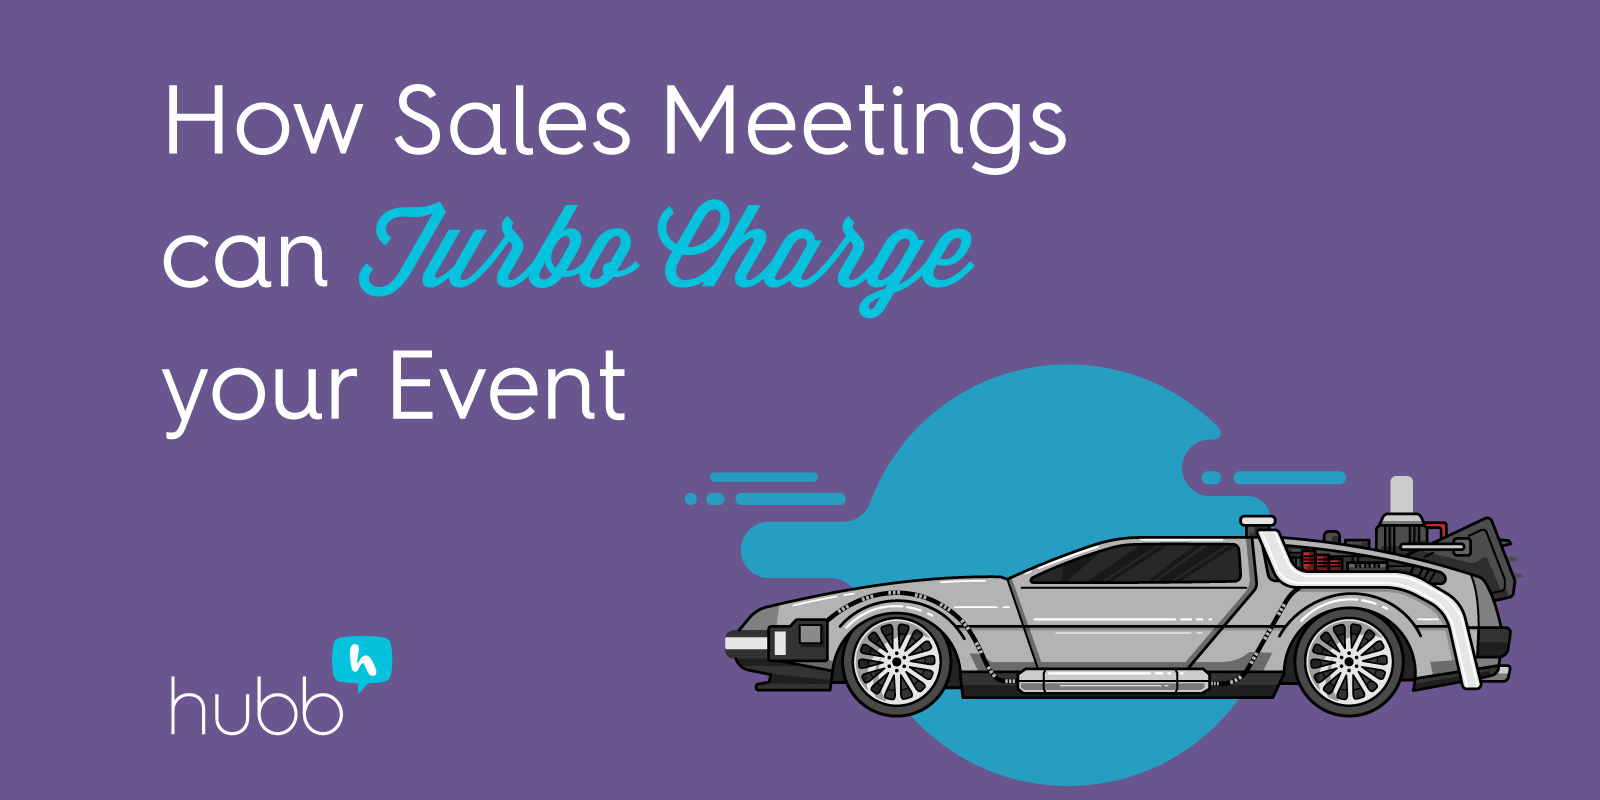 How Sales Meetings Can Turbo Charge your Event